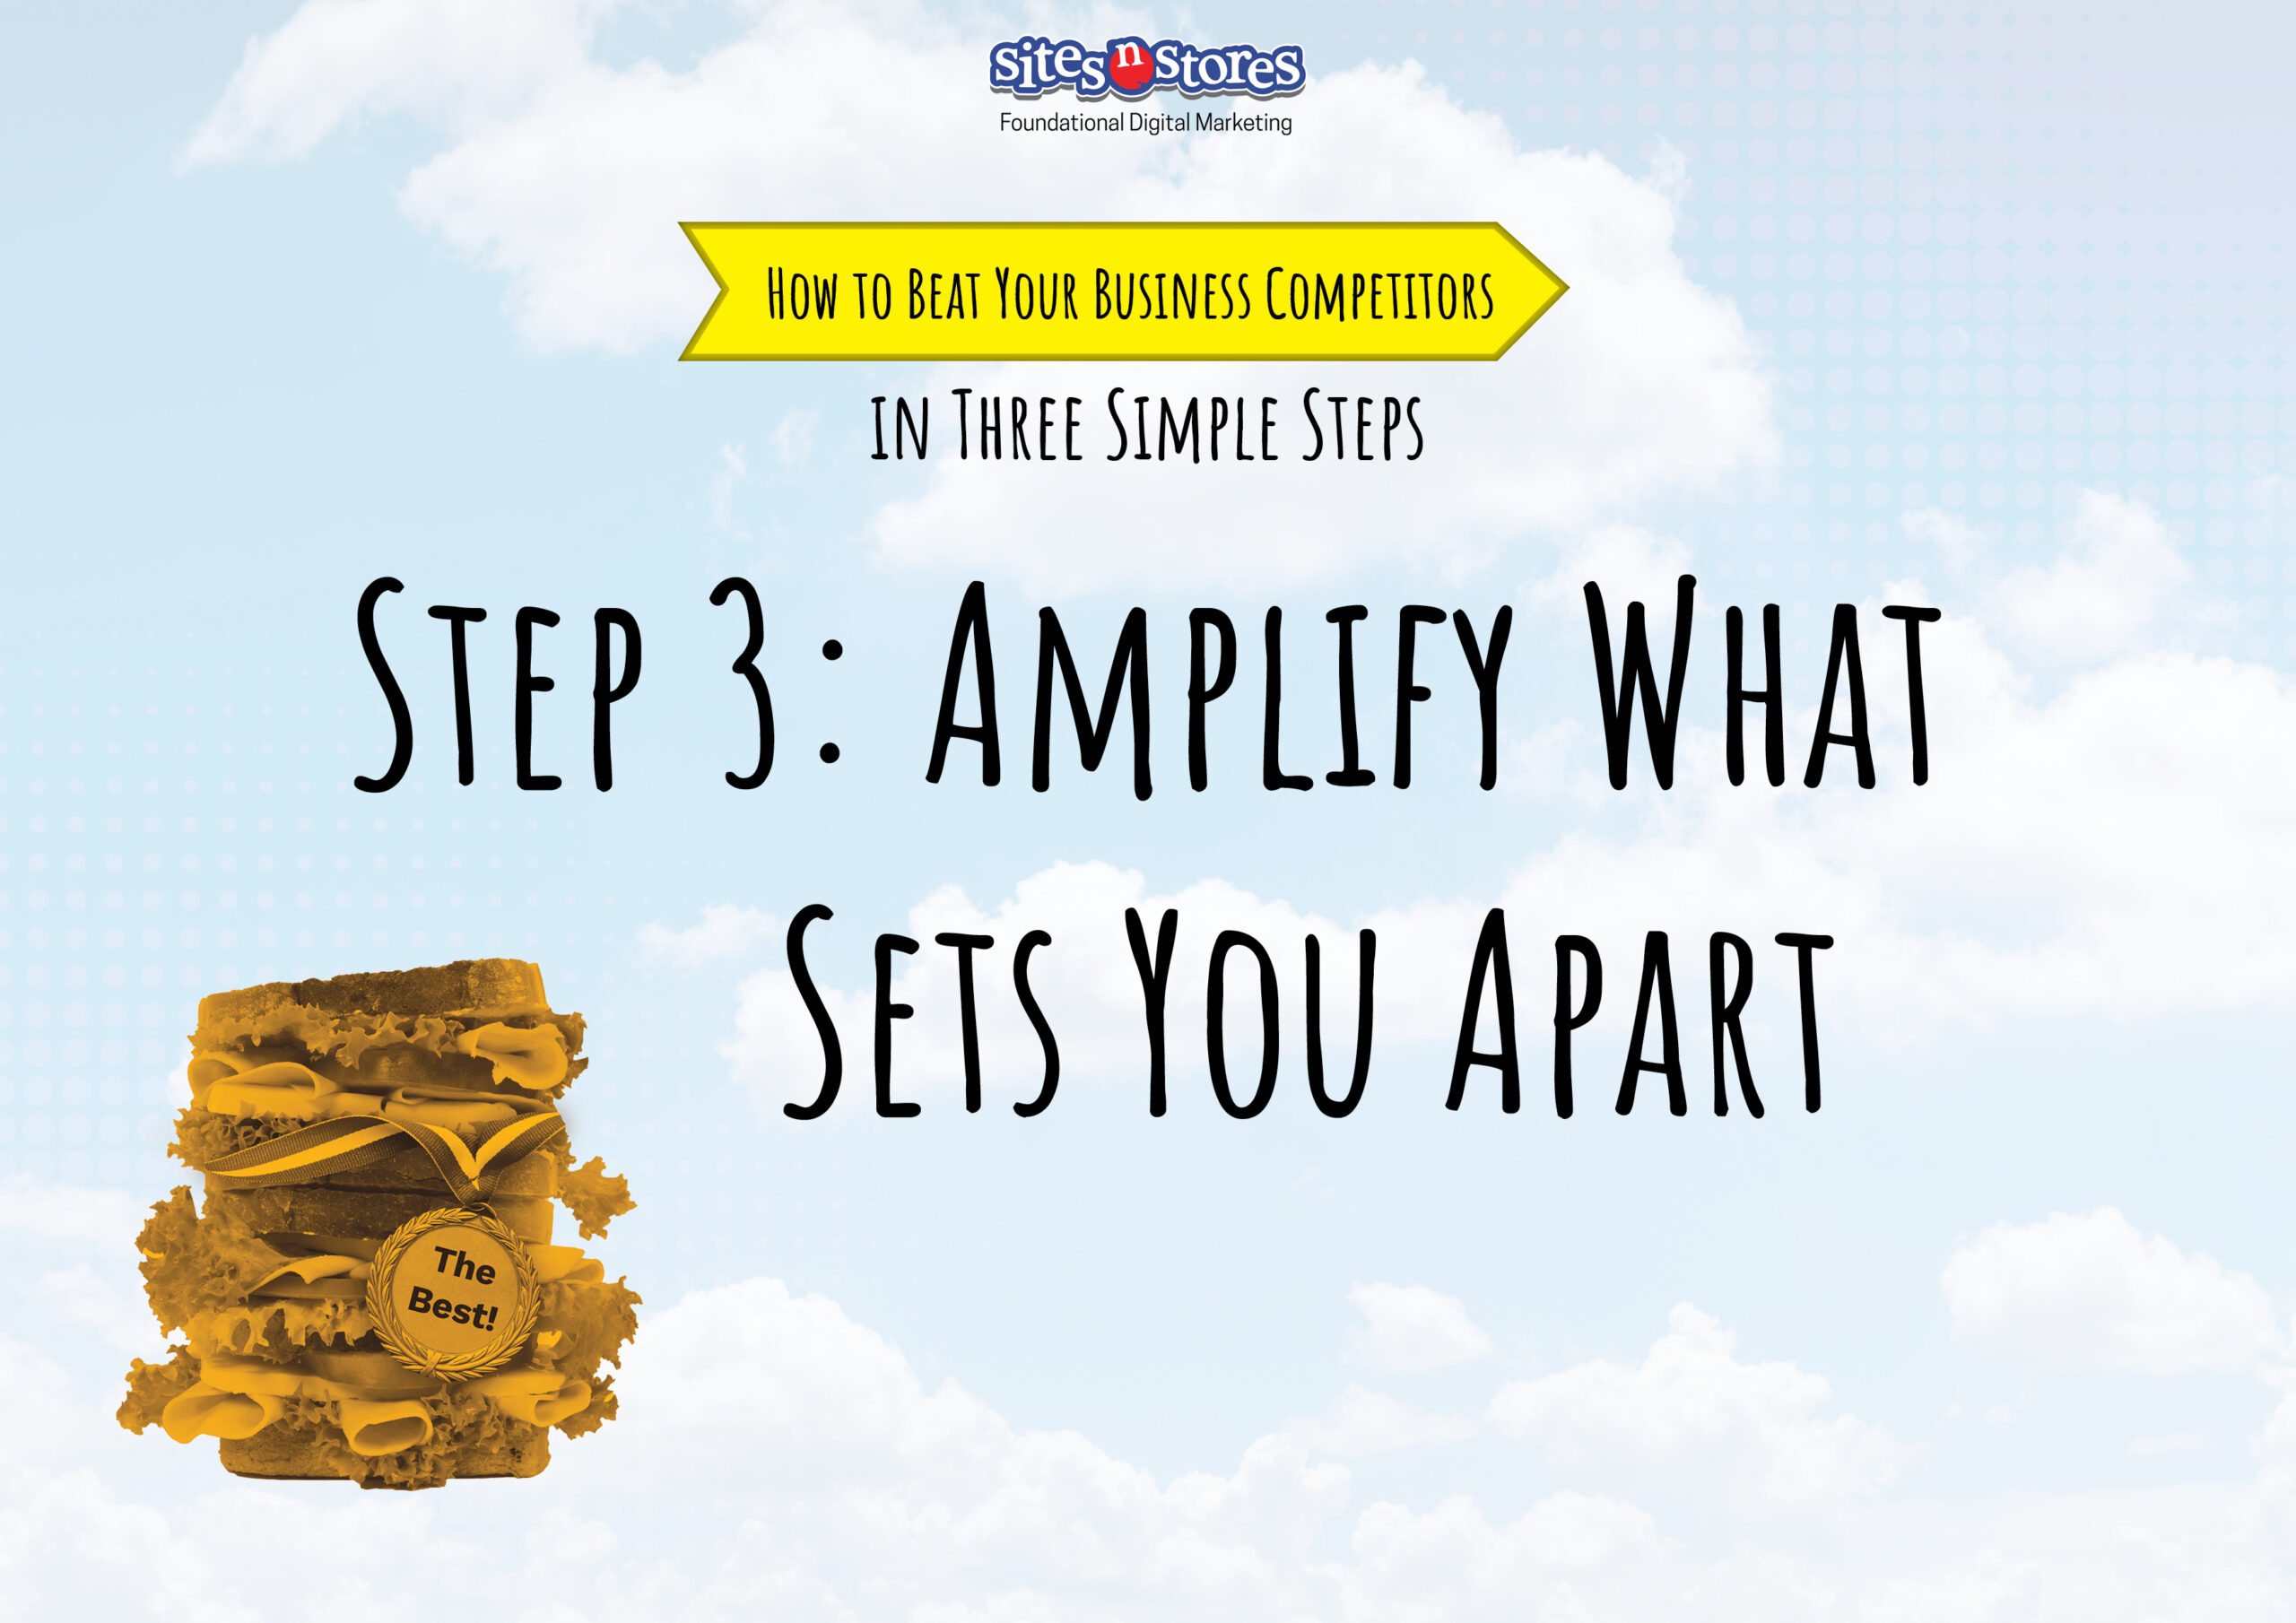 Step 3: Amplify What Sets You Apart